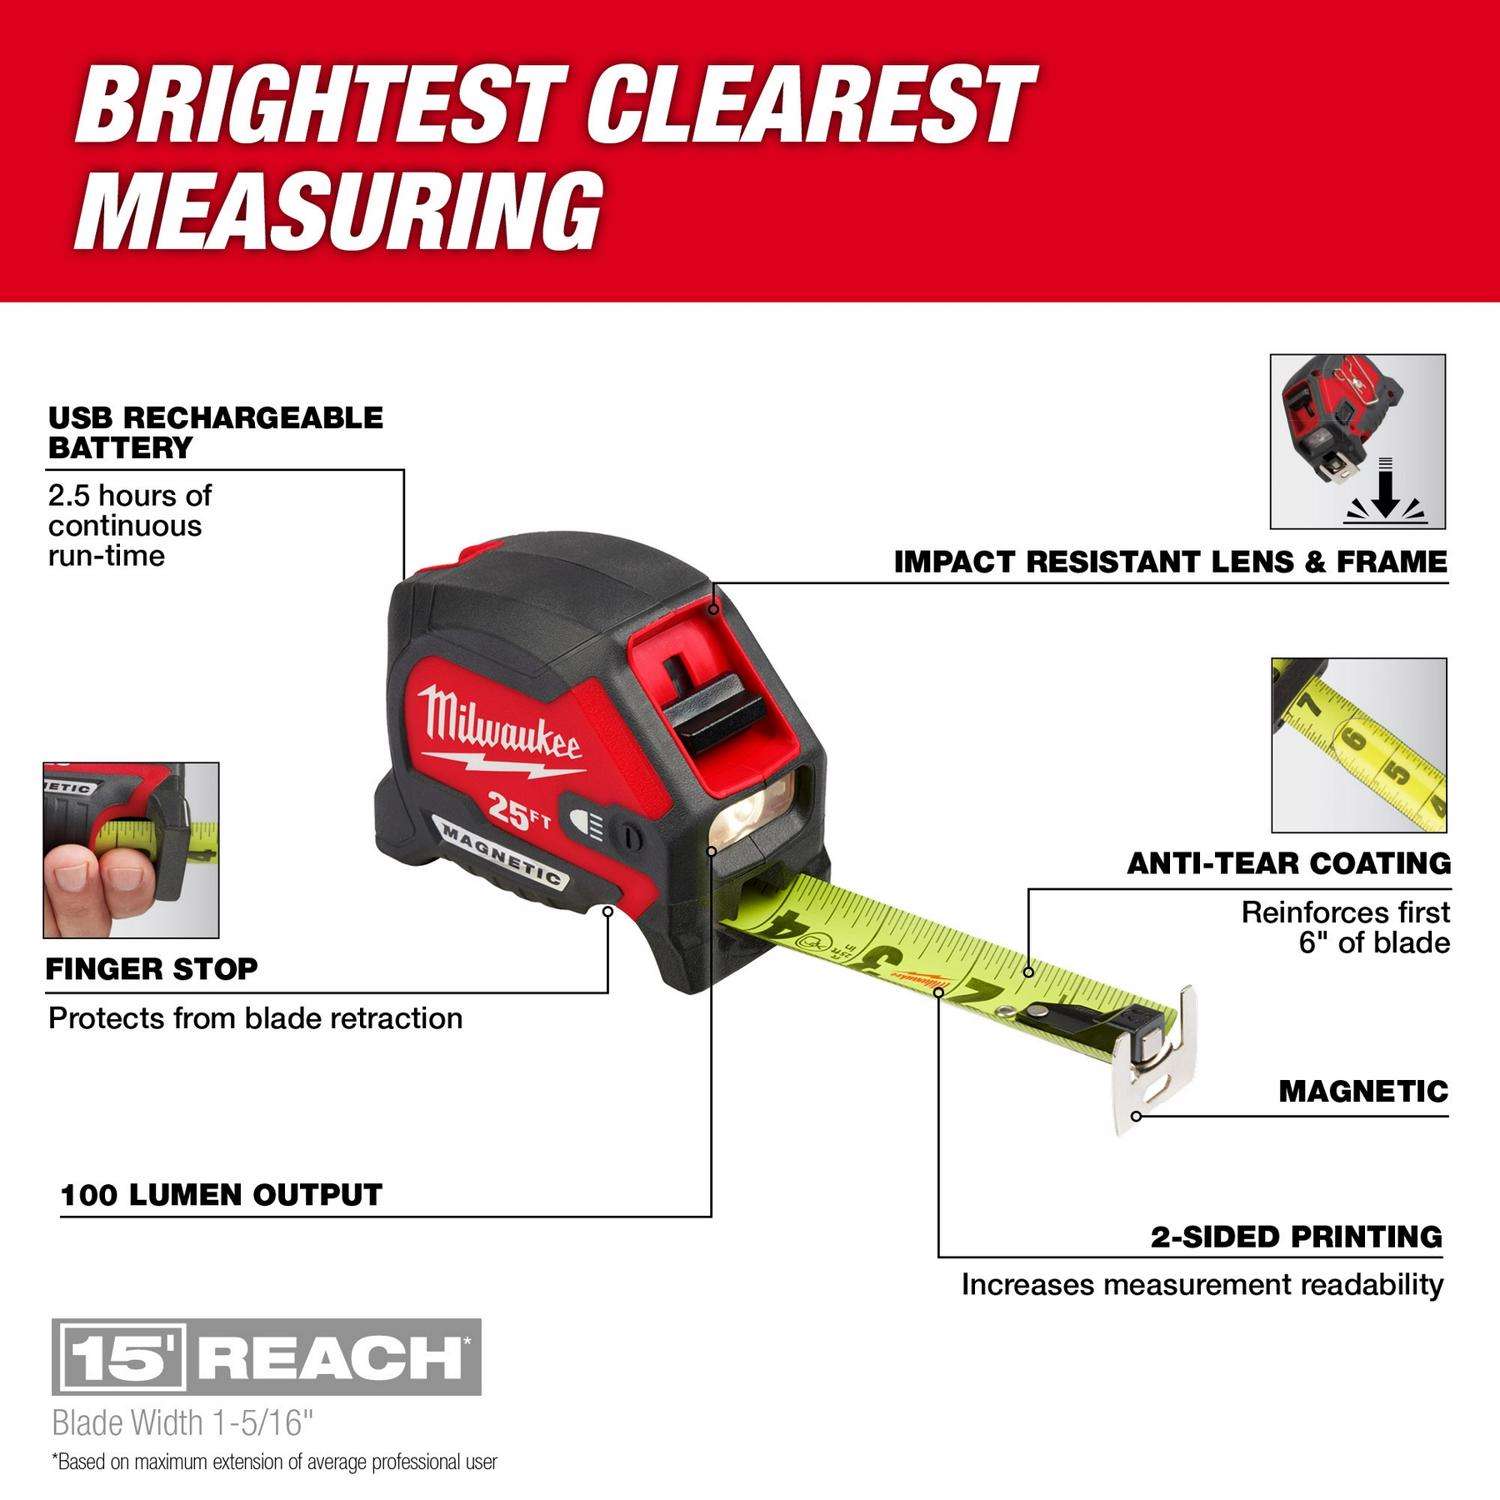 Milwaukee 16 ft. x 1-5/16 in. W Blade Tape Measure with 16 ft